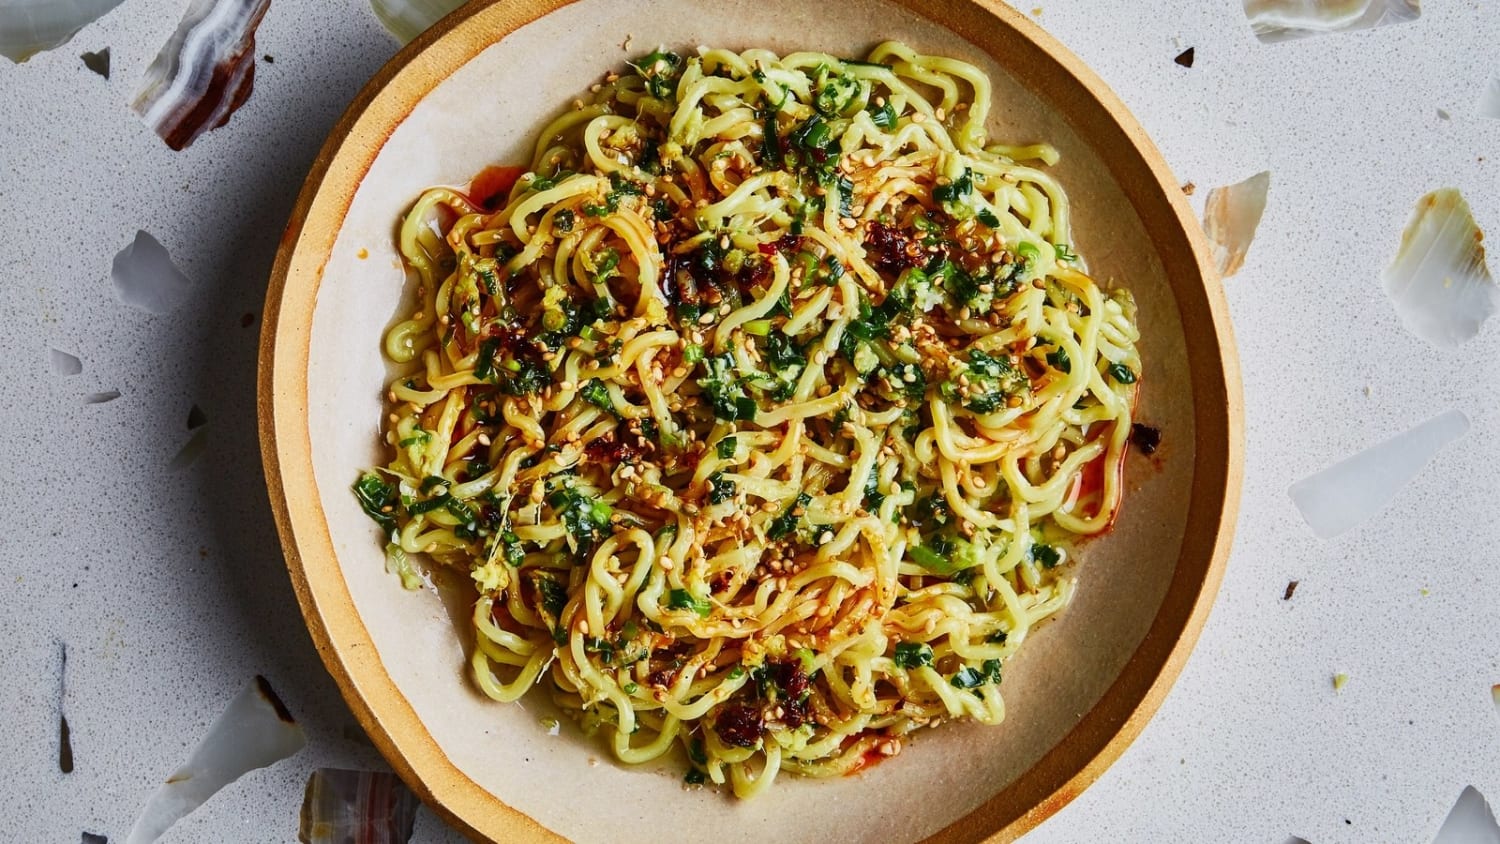 54 Vegan Recipes That Are Healthy, Hearty, and Delicious